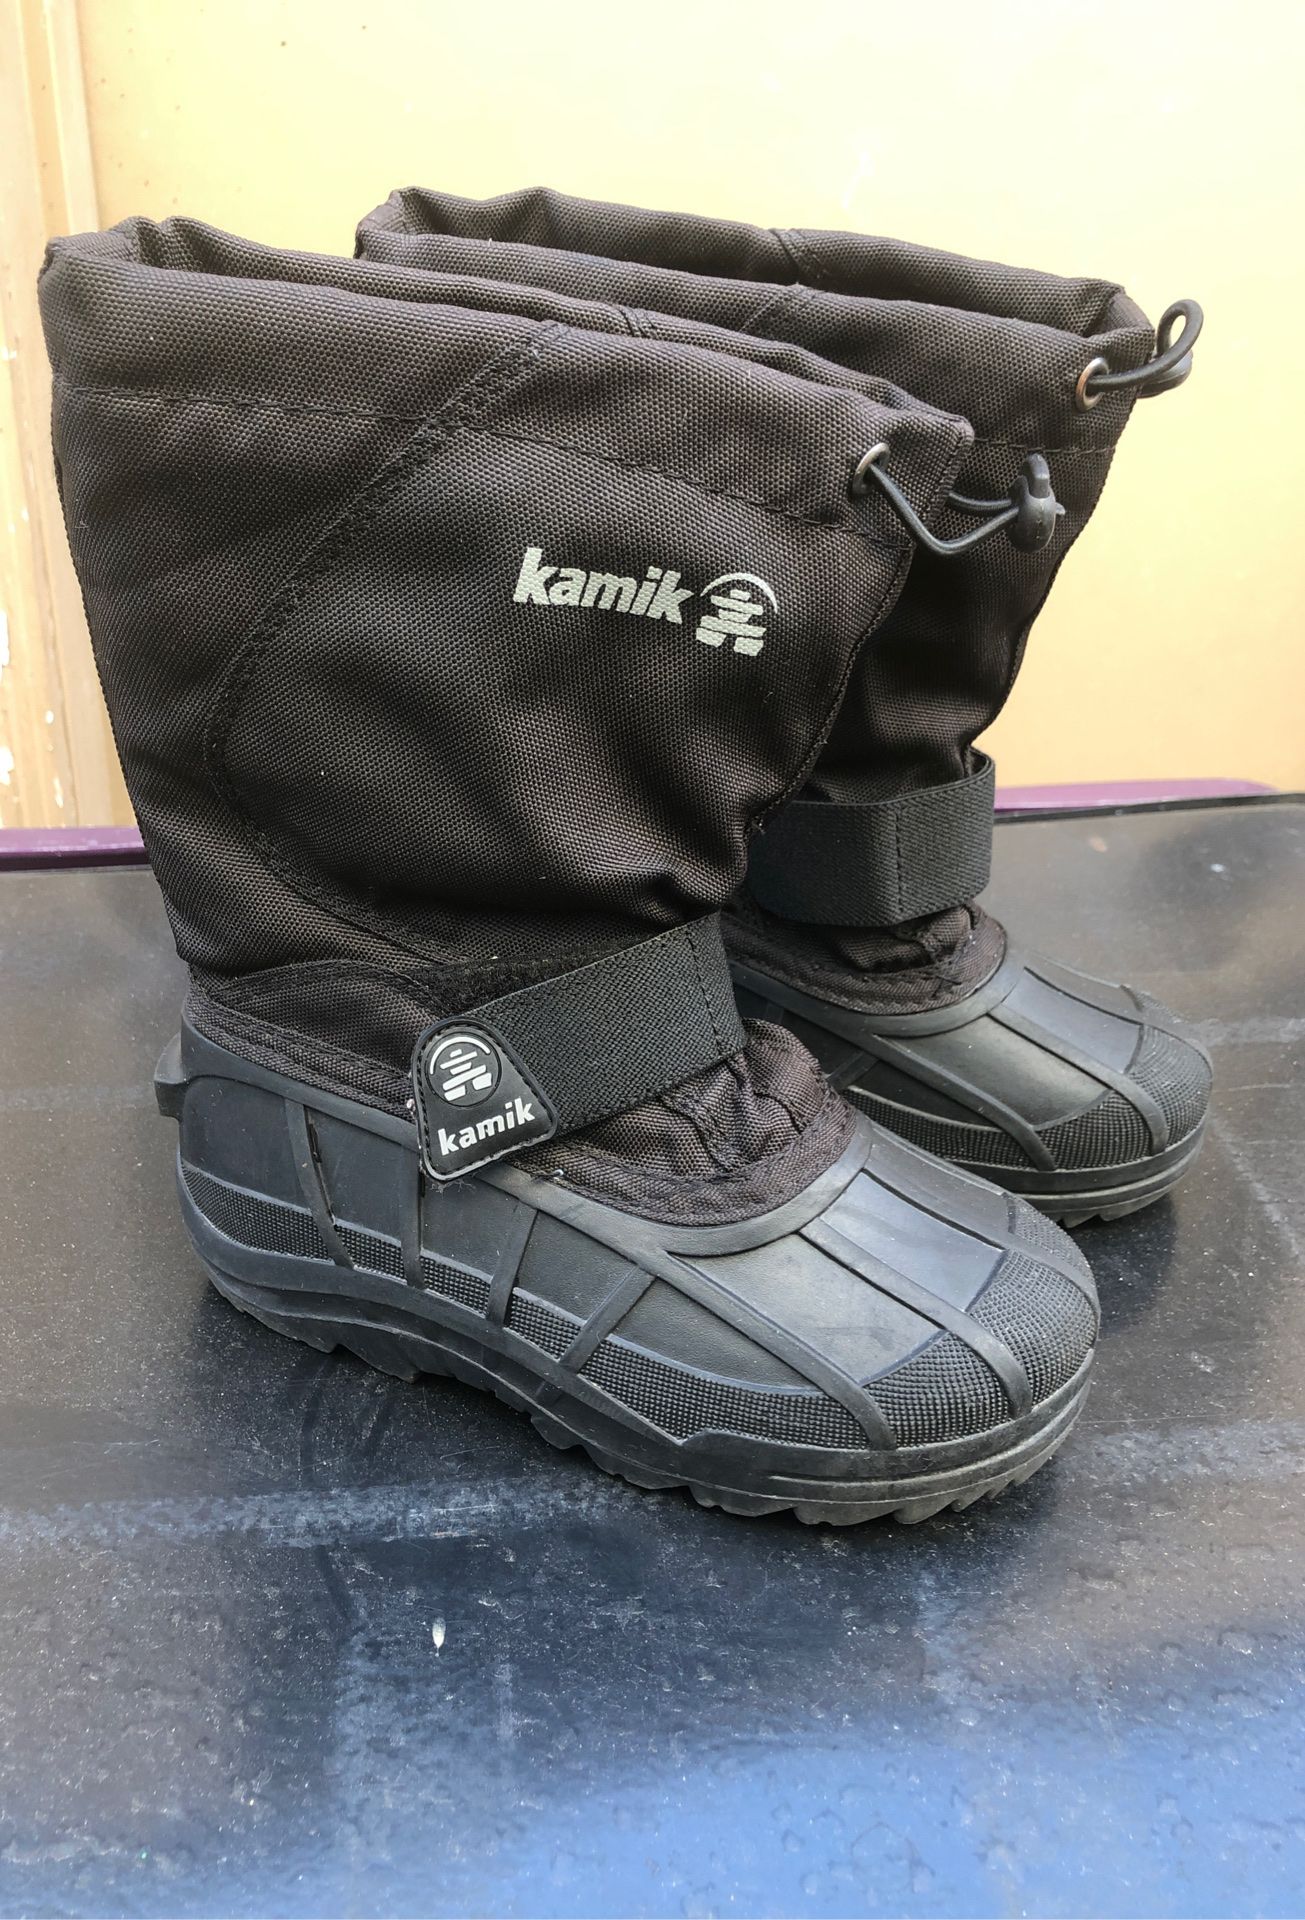 Snow boots for kids size , 12c